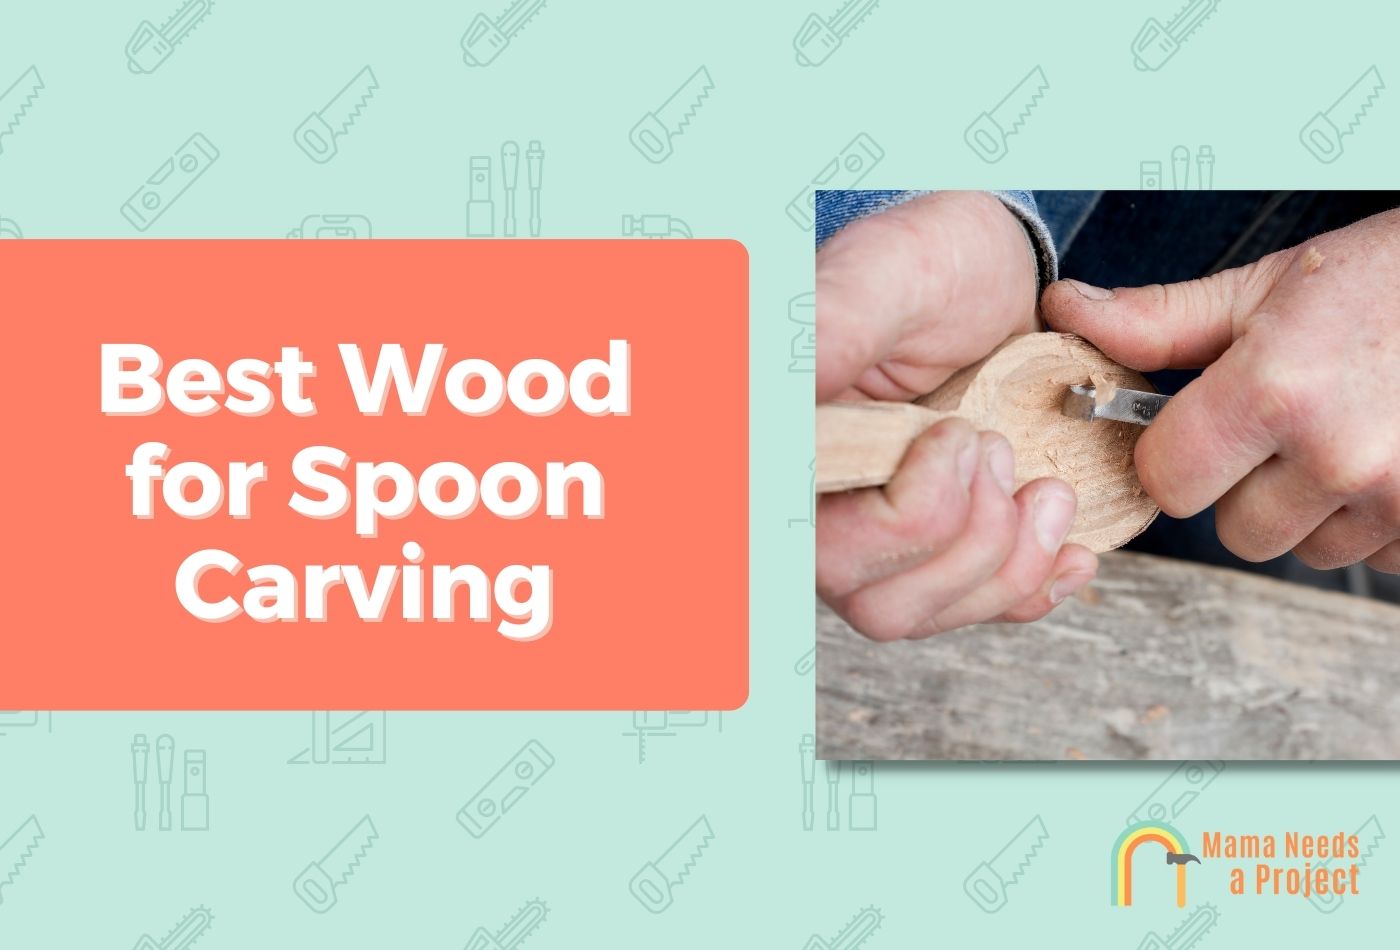 Best Wood for Spoon Carving